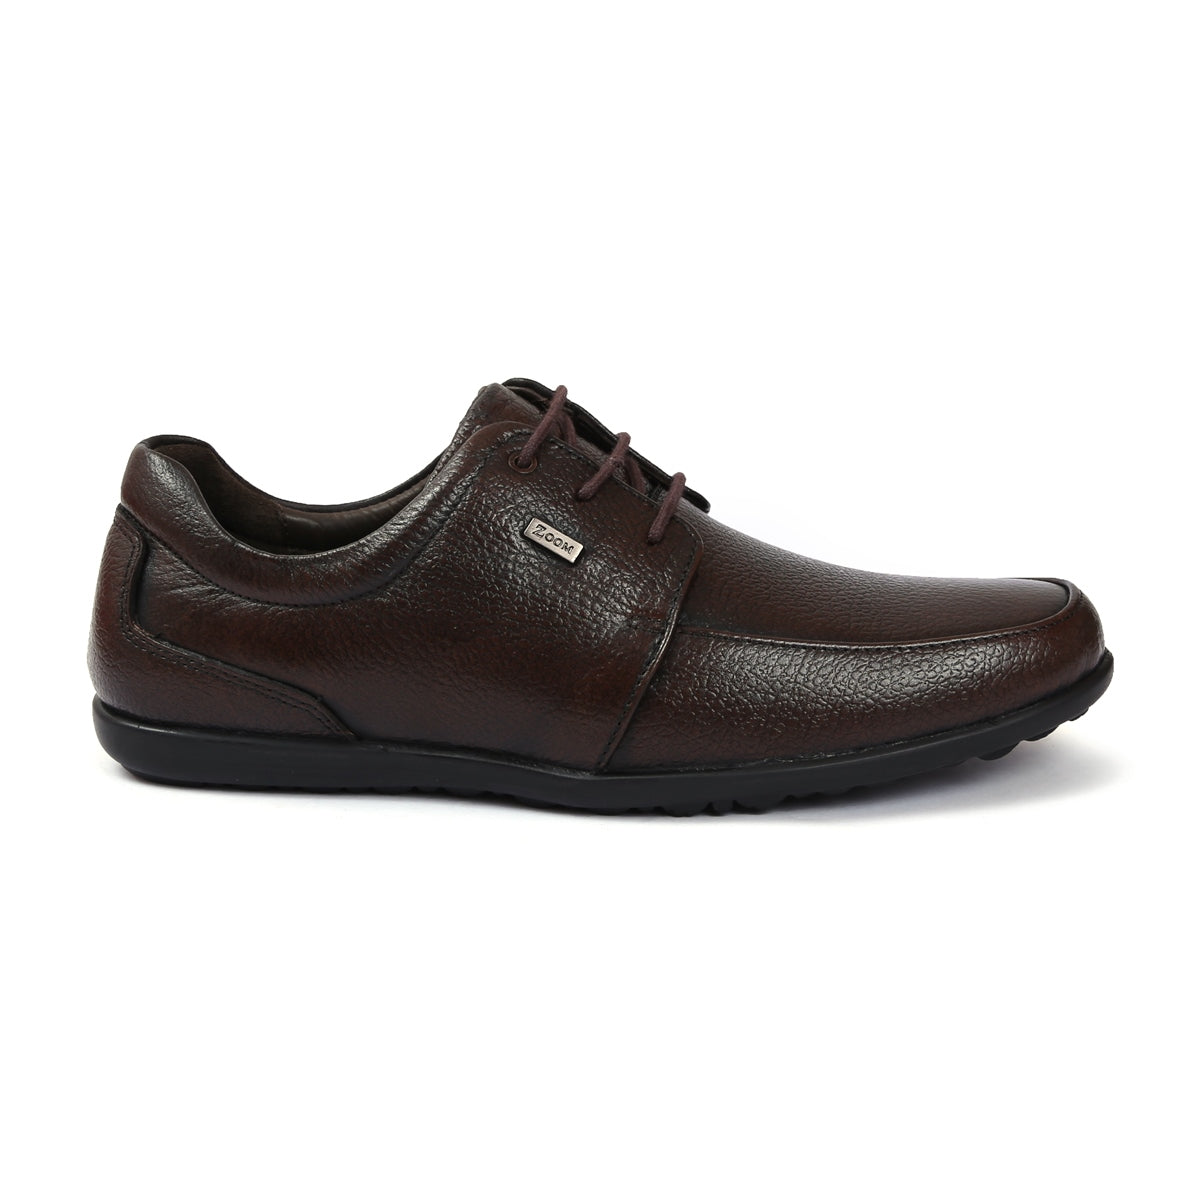 Casual Lace Up Shoes for Men in Genuine Leather NH – 78